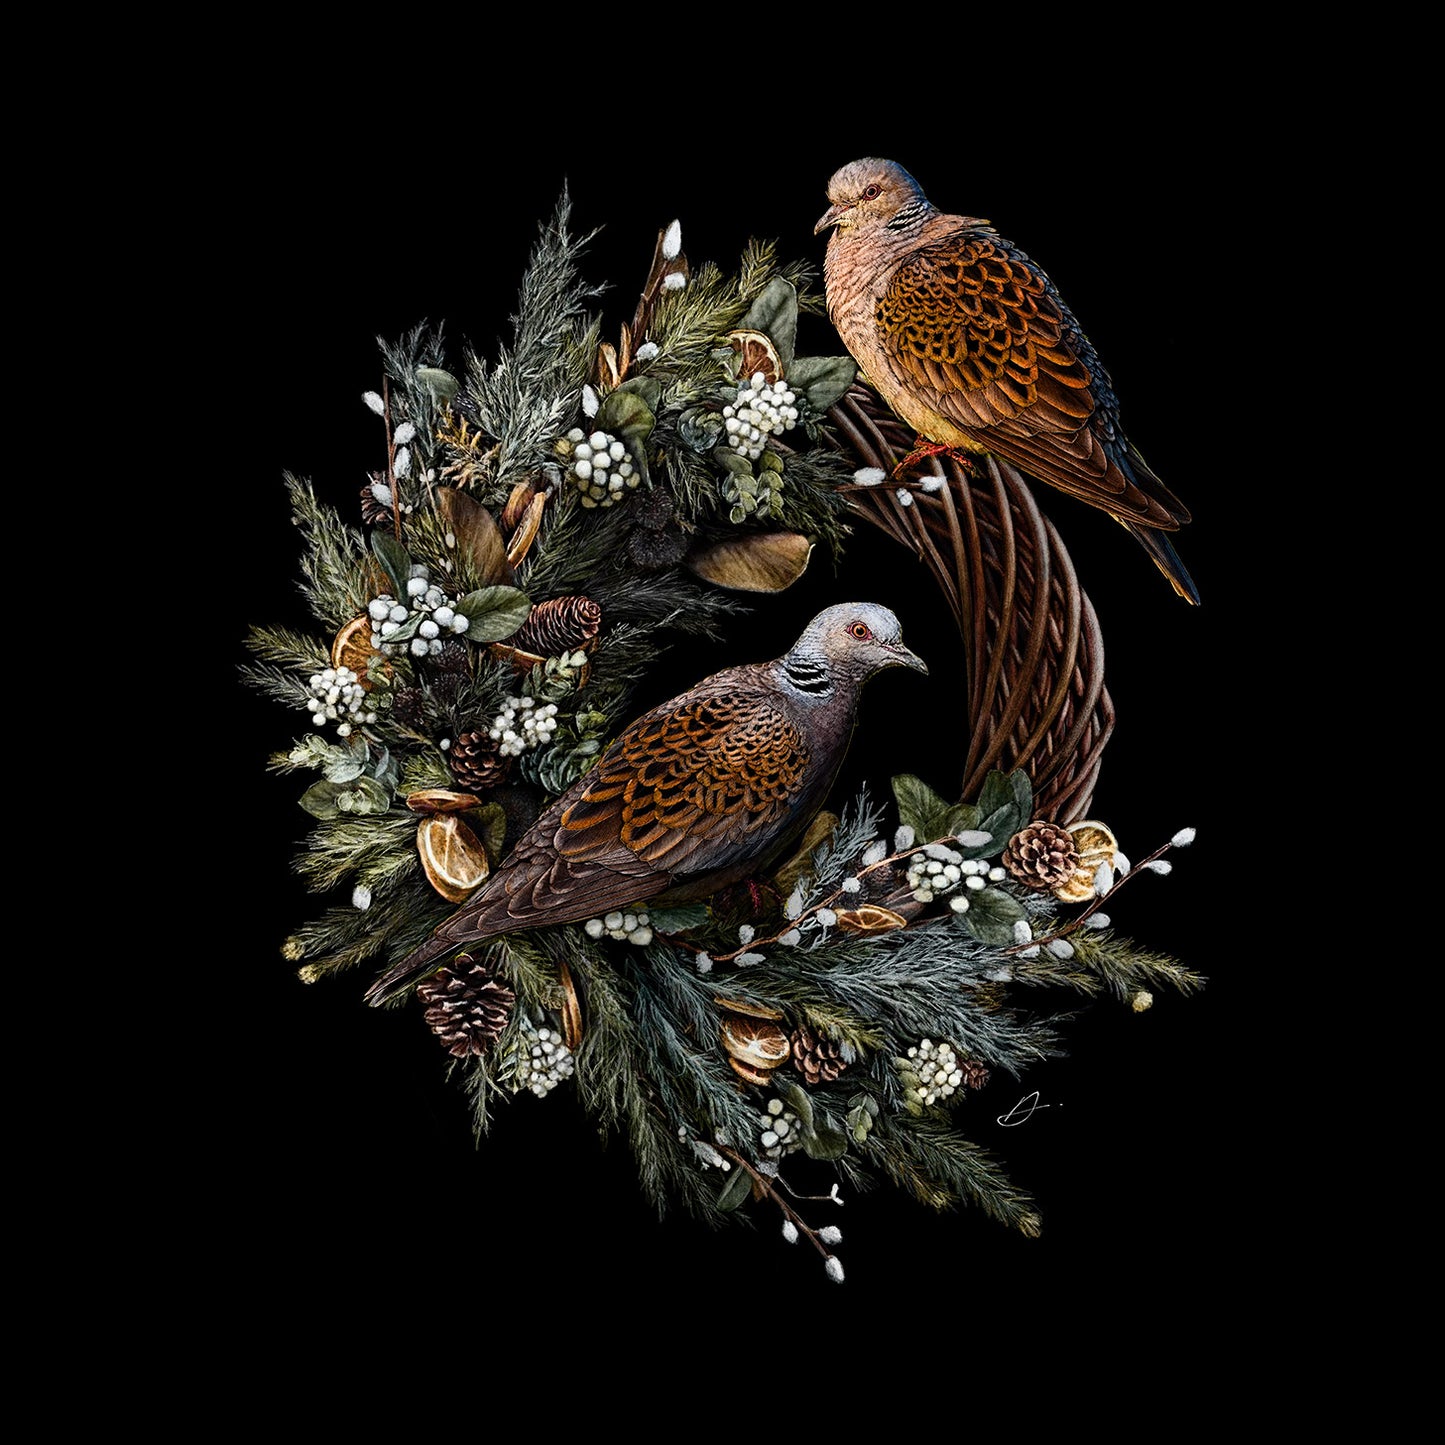 Flora & Fauna - Two Turtle Doves